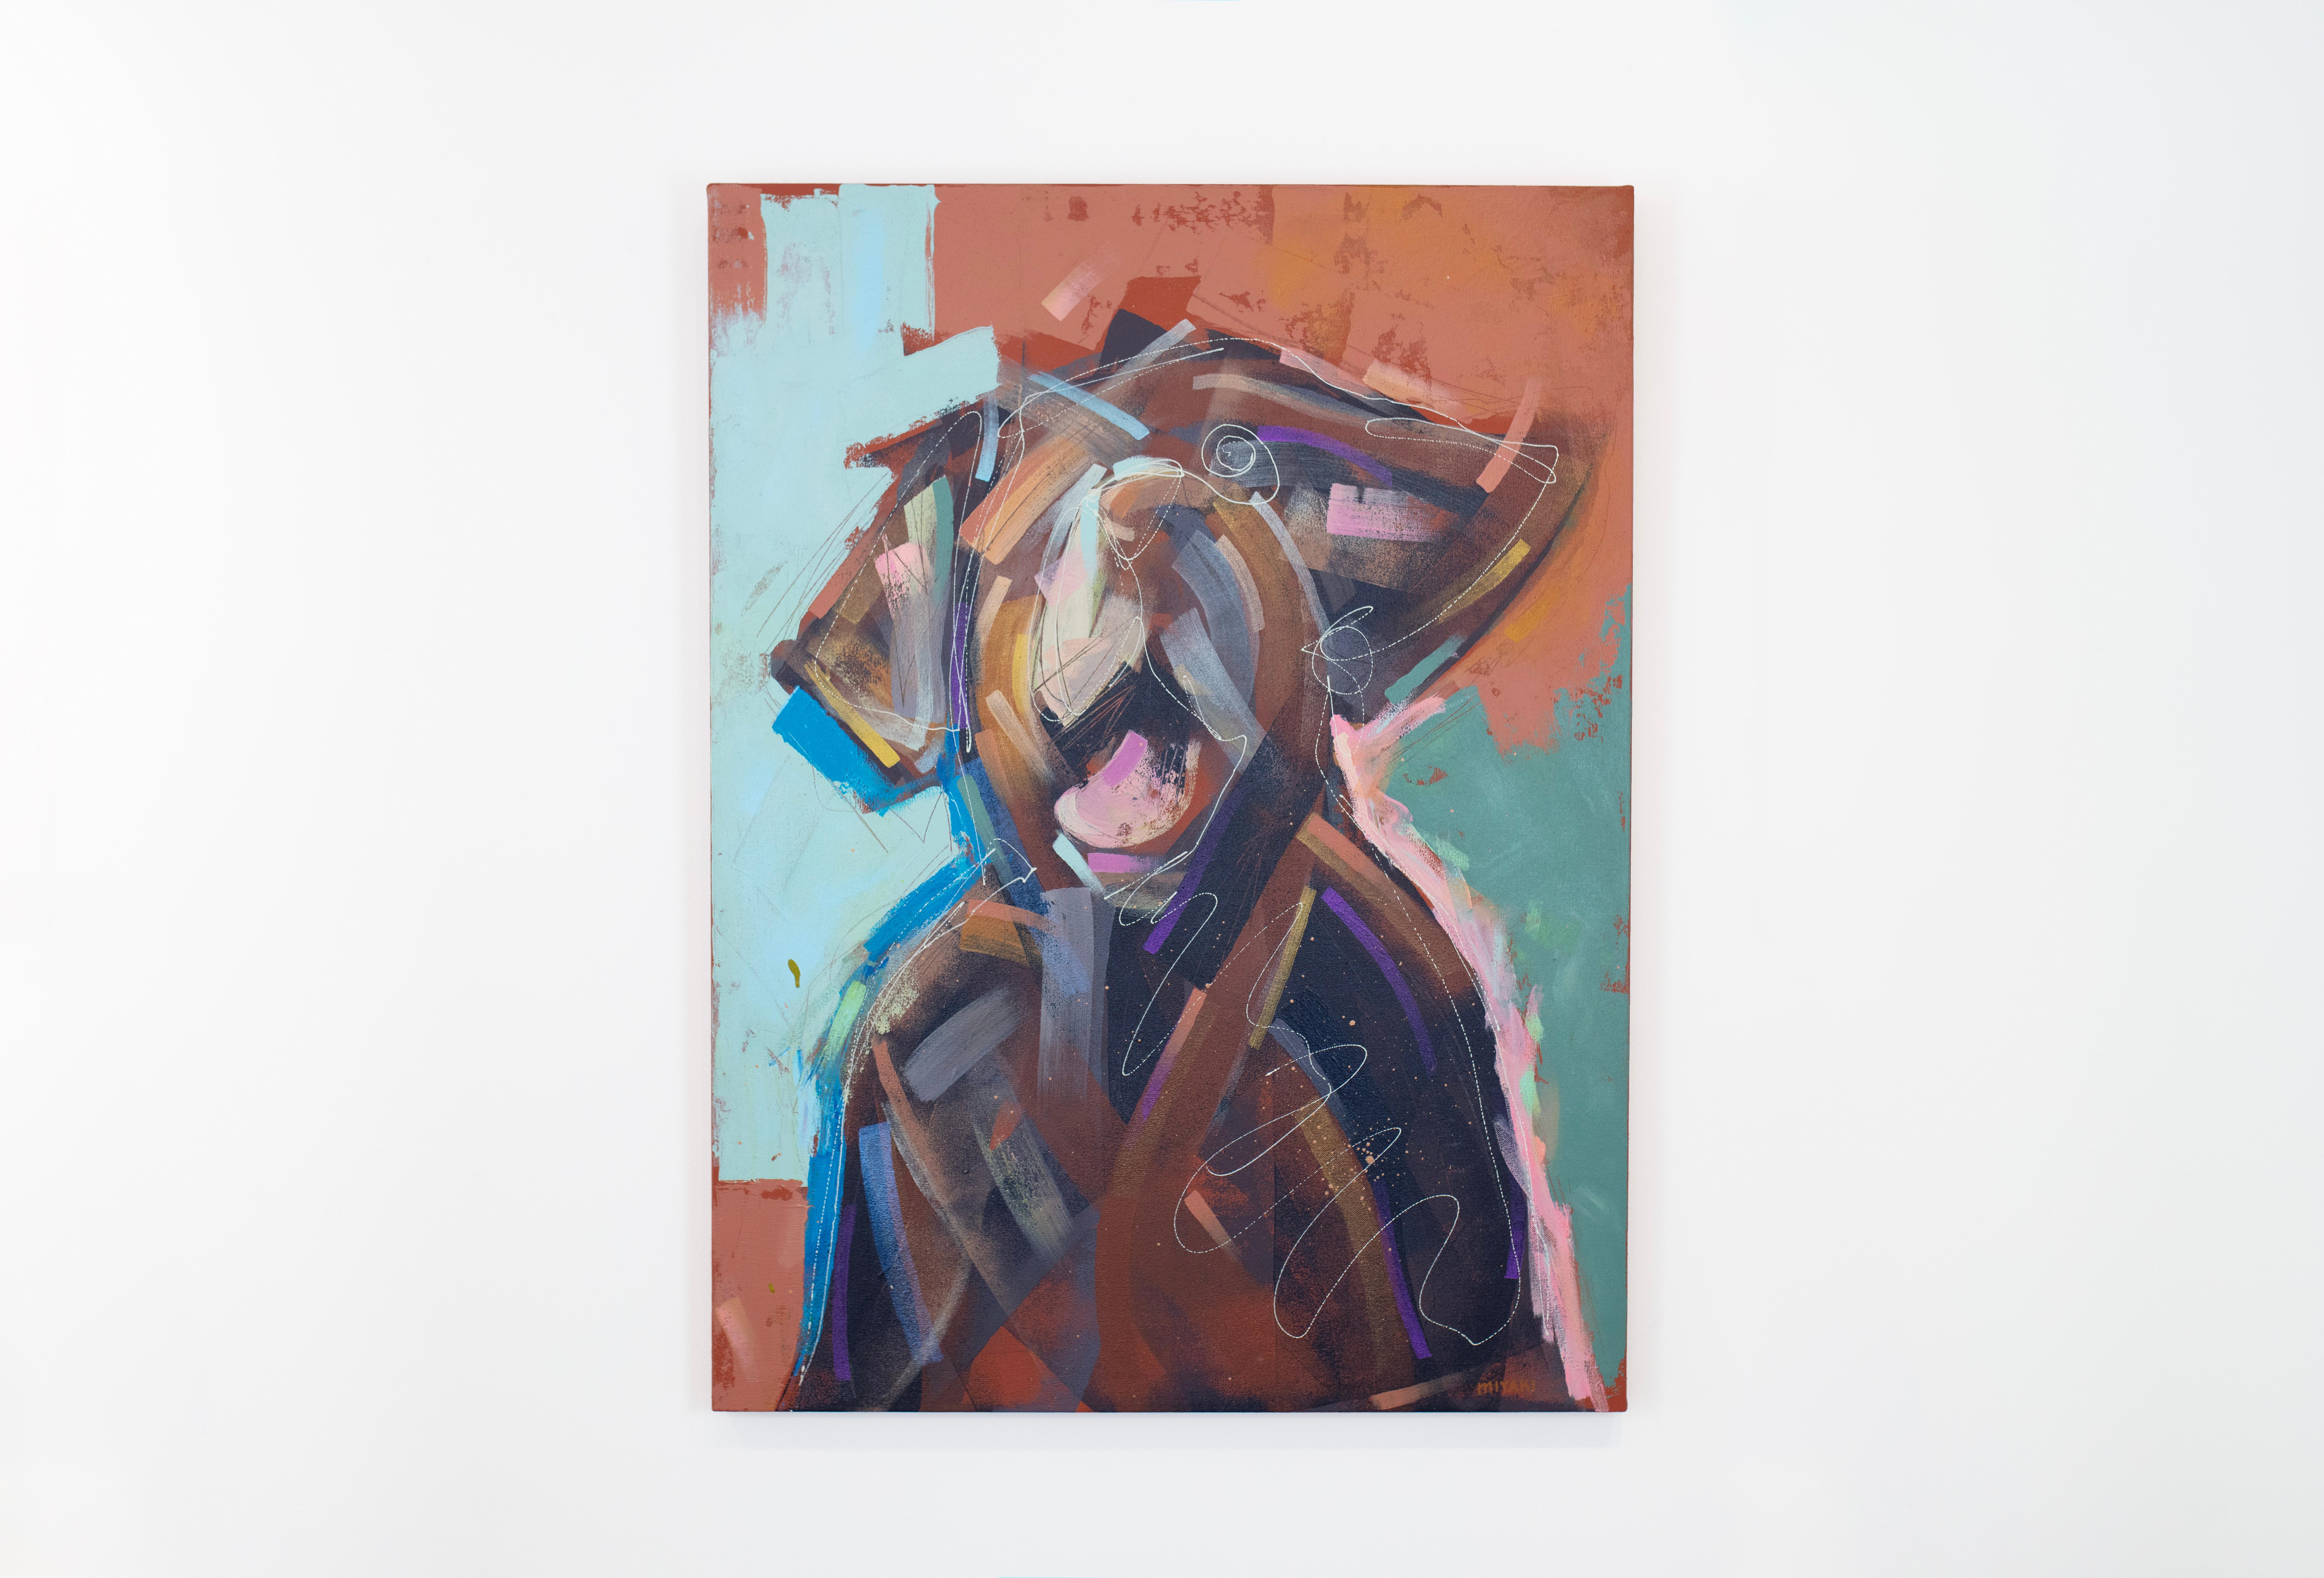 This abstracted painting of a Brown Labrador Retriever features a loose, energetic style and vibrant colors. The artist layers wide brush strokes and thin, swirling line to create the dog's form, with a vibrant red and teal background. The painting